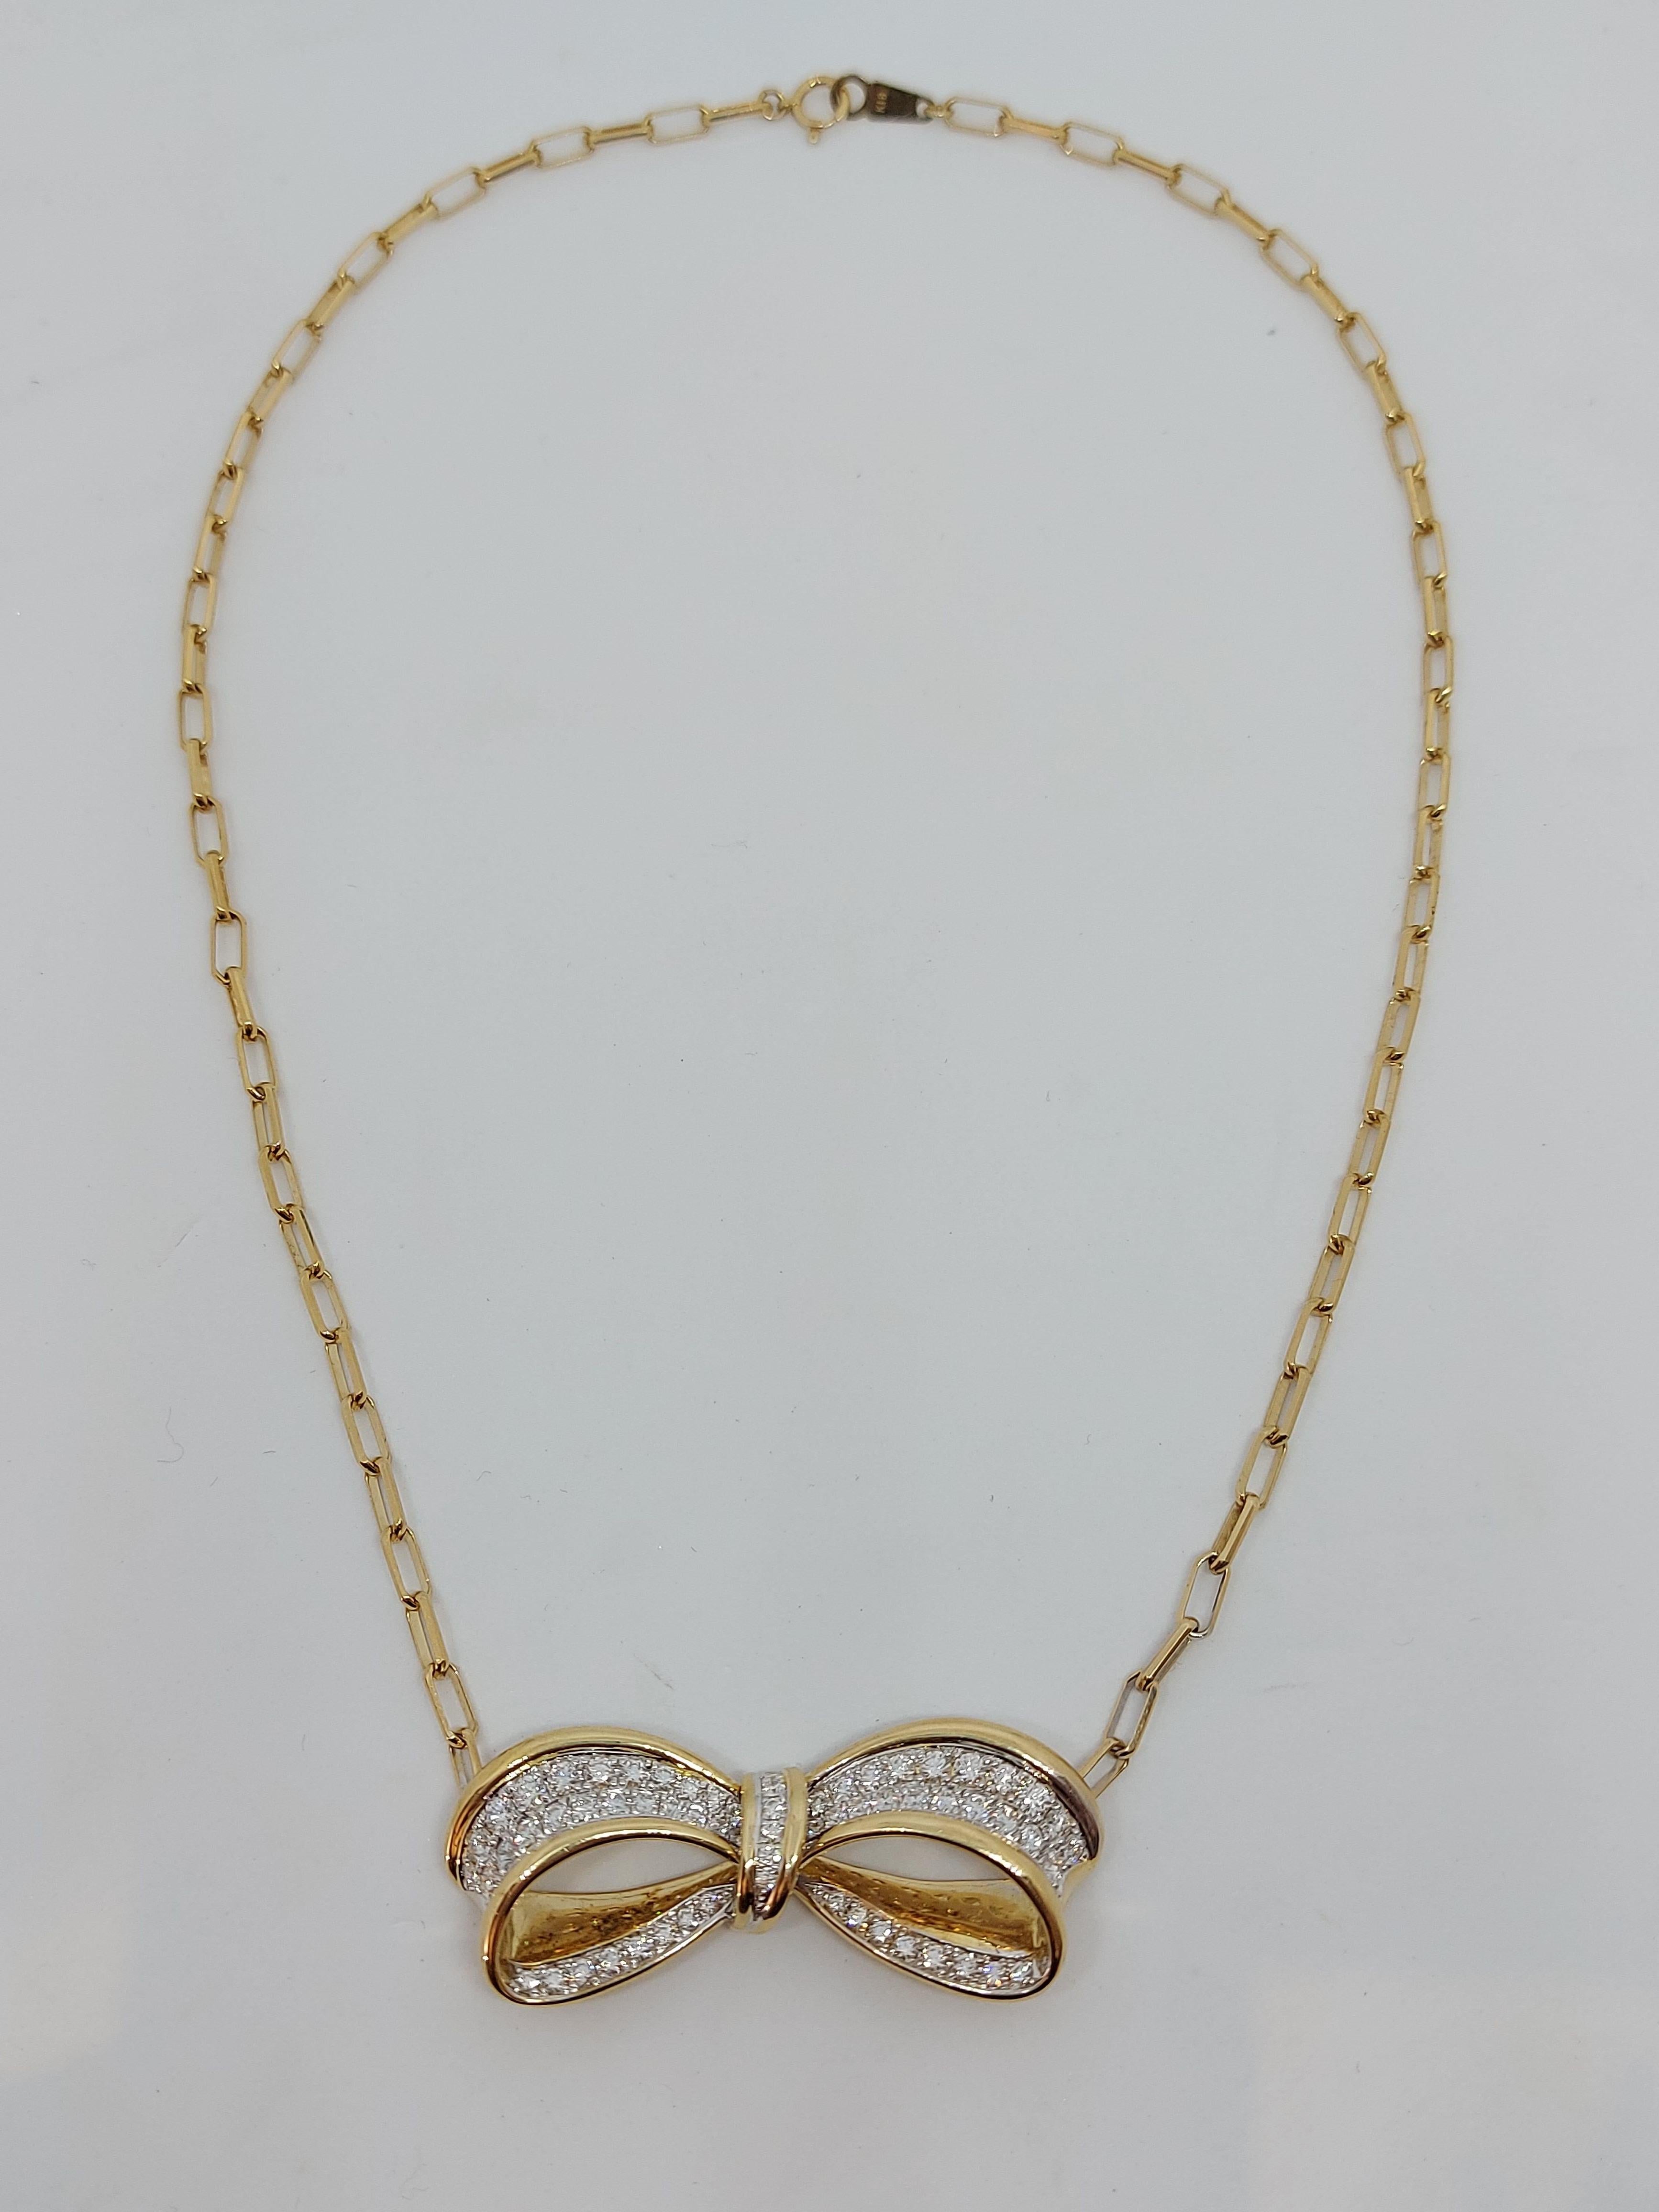 18 Karat Solid Yellow and White Gold Bow Necklace with Diamonds 6